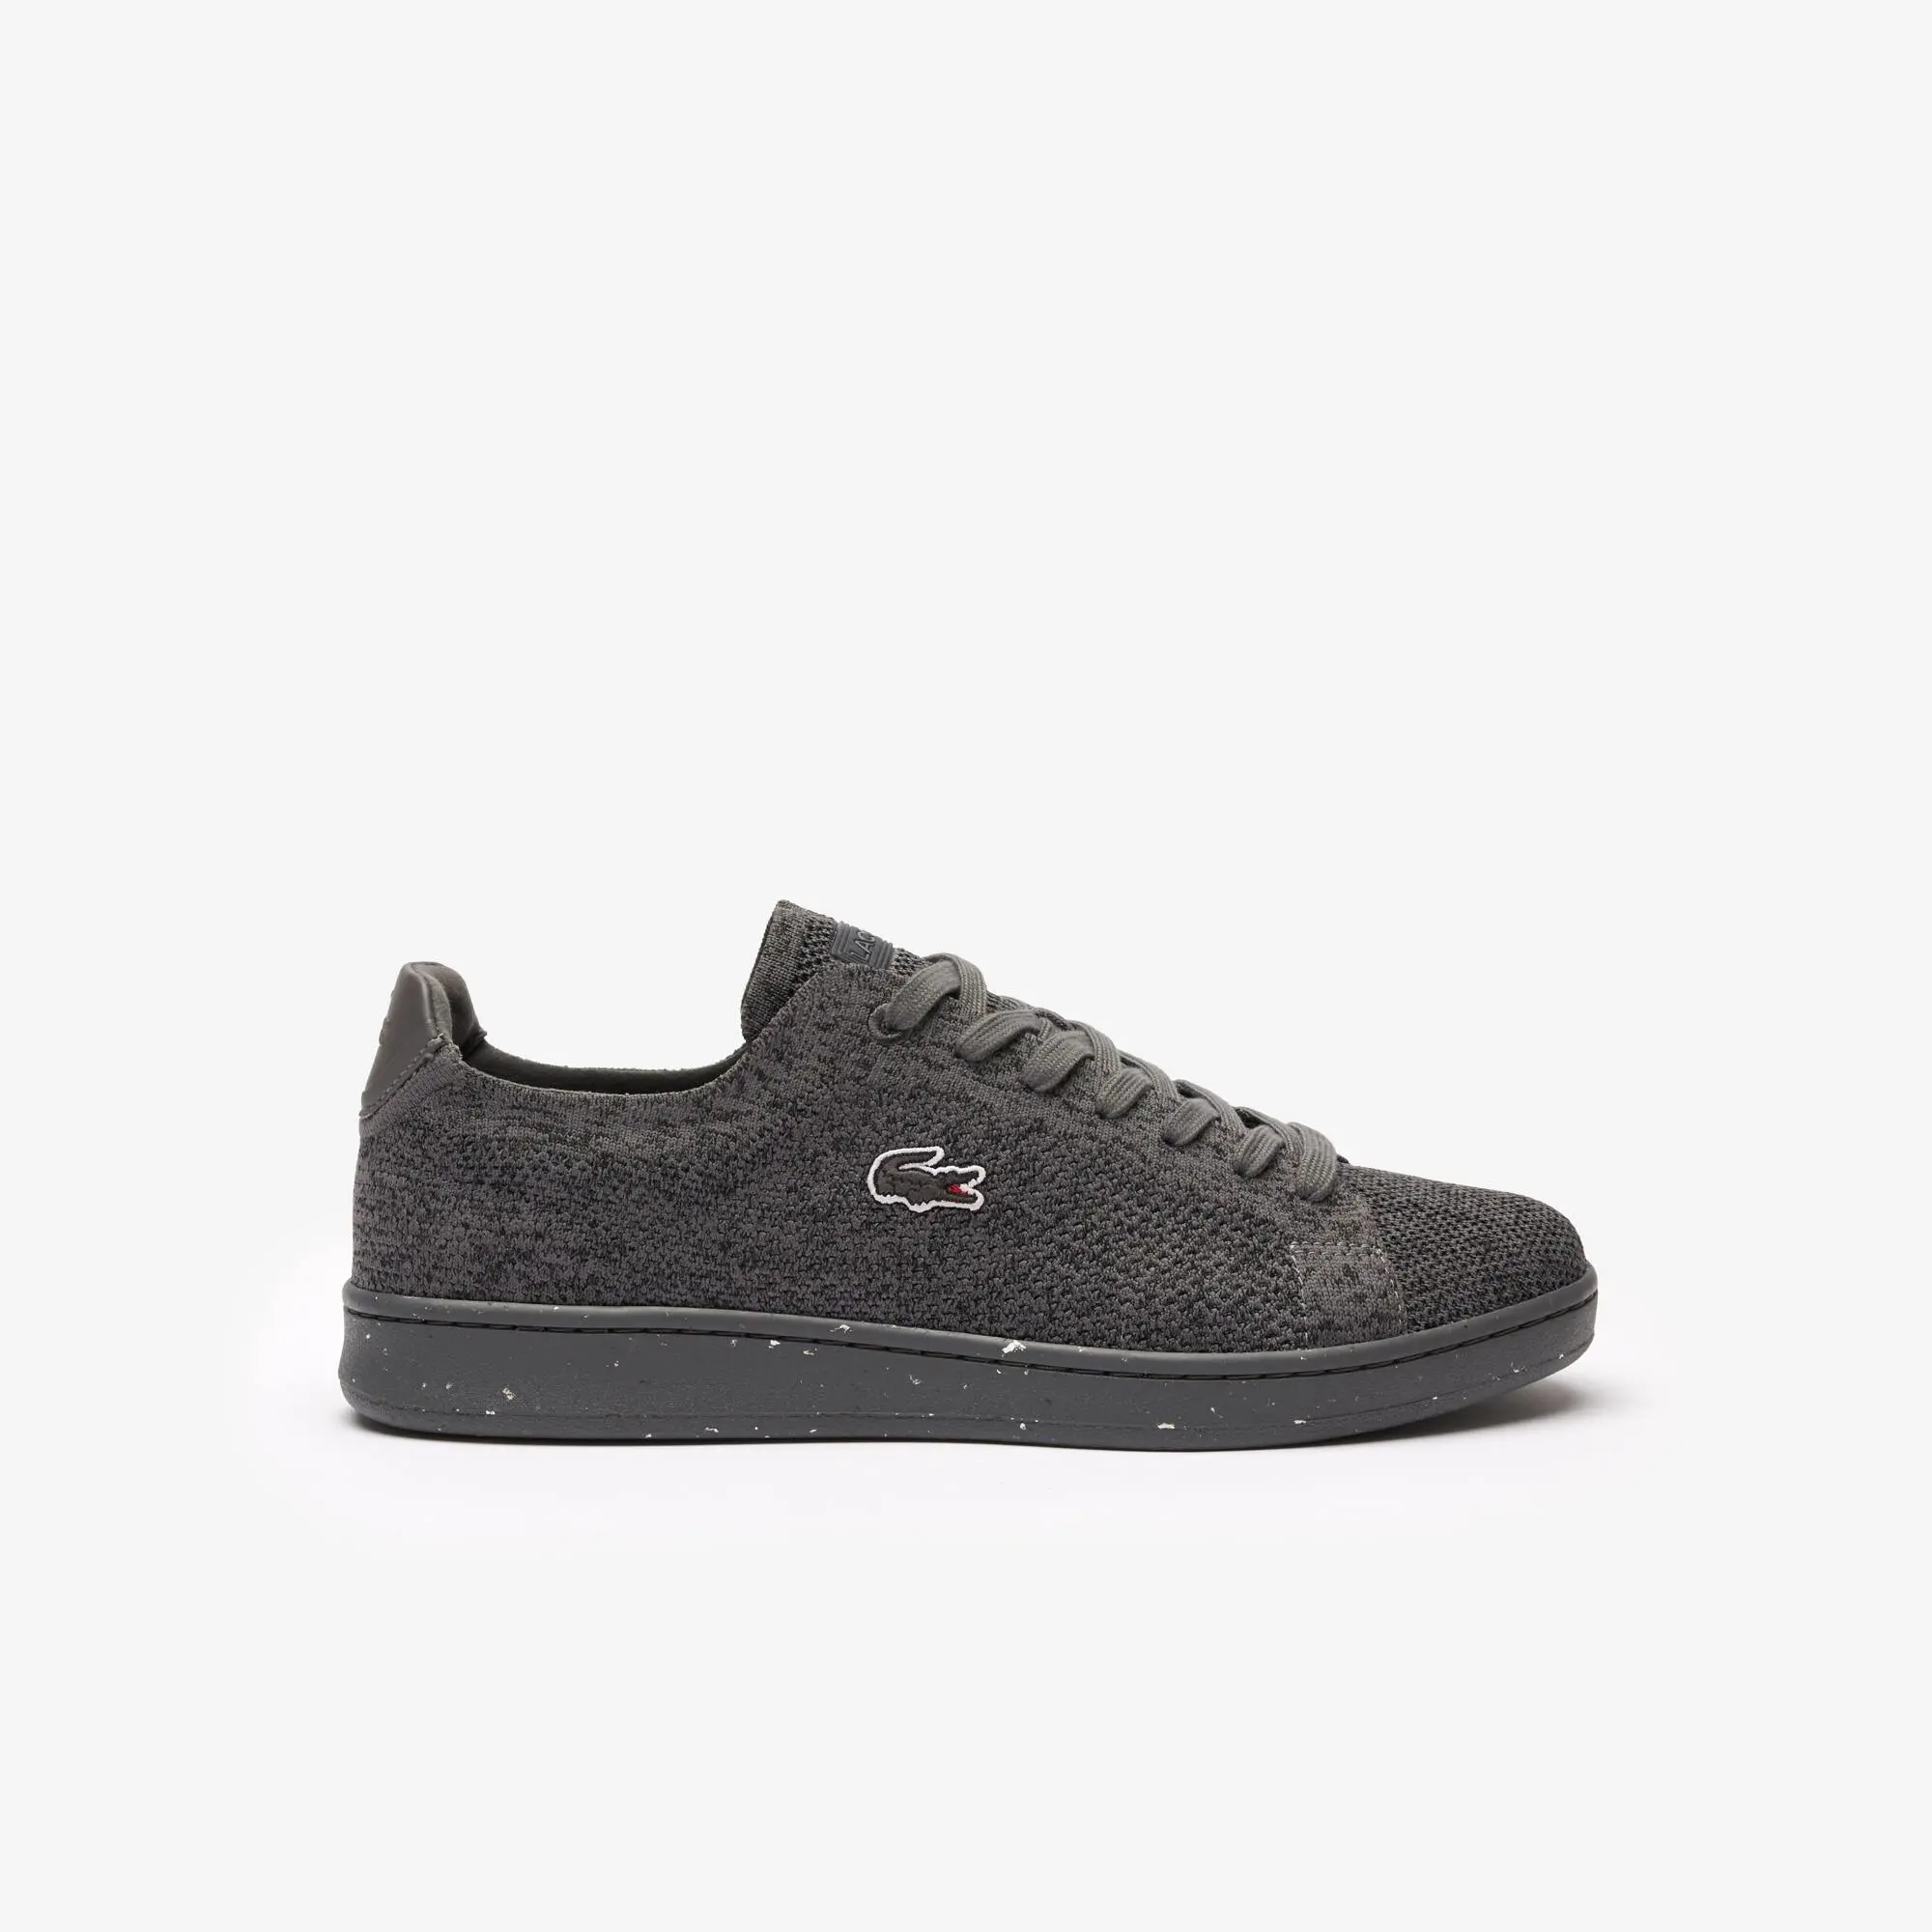 Lacoste Men's Carnaby Piquée Recycled Fiber Trainers. 1